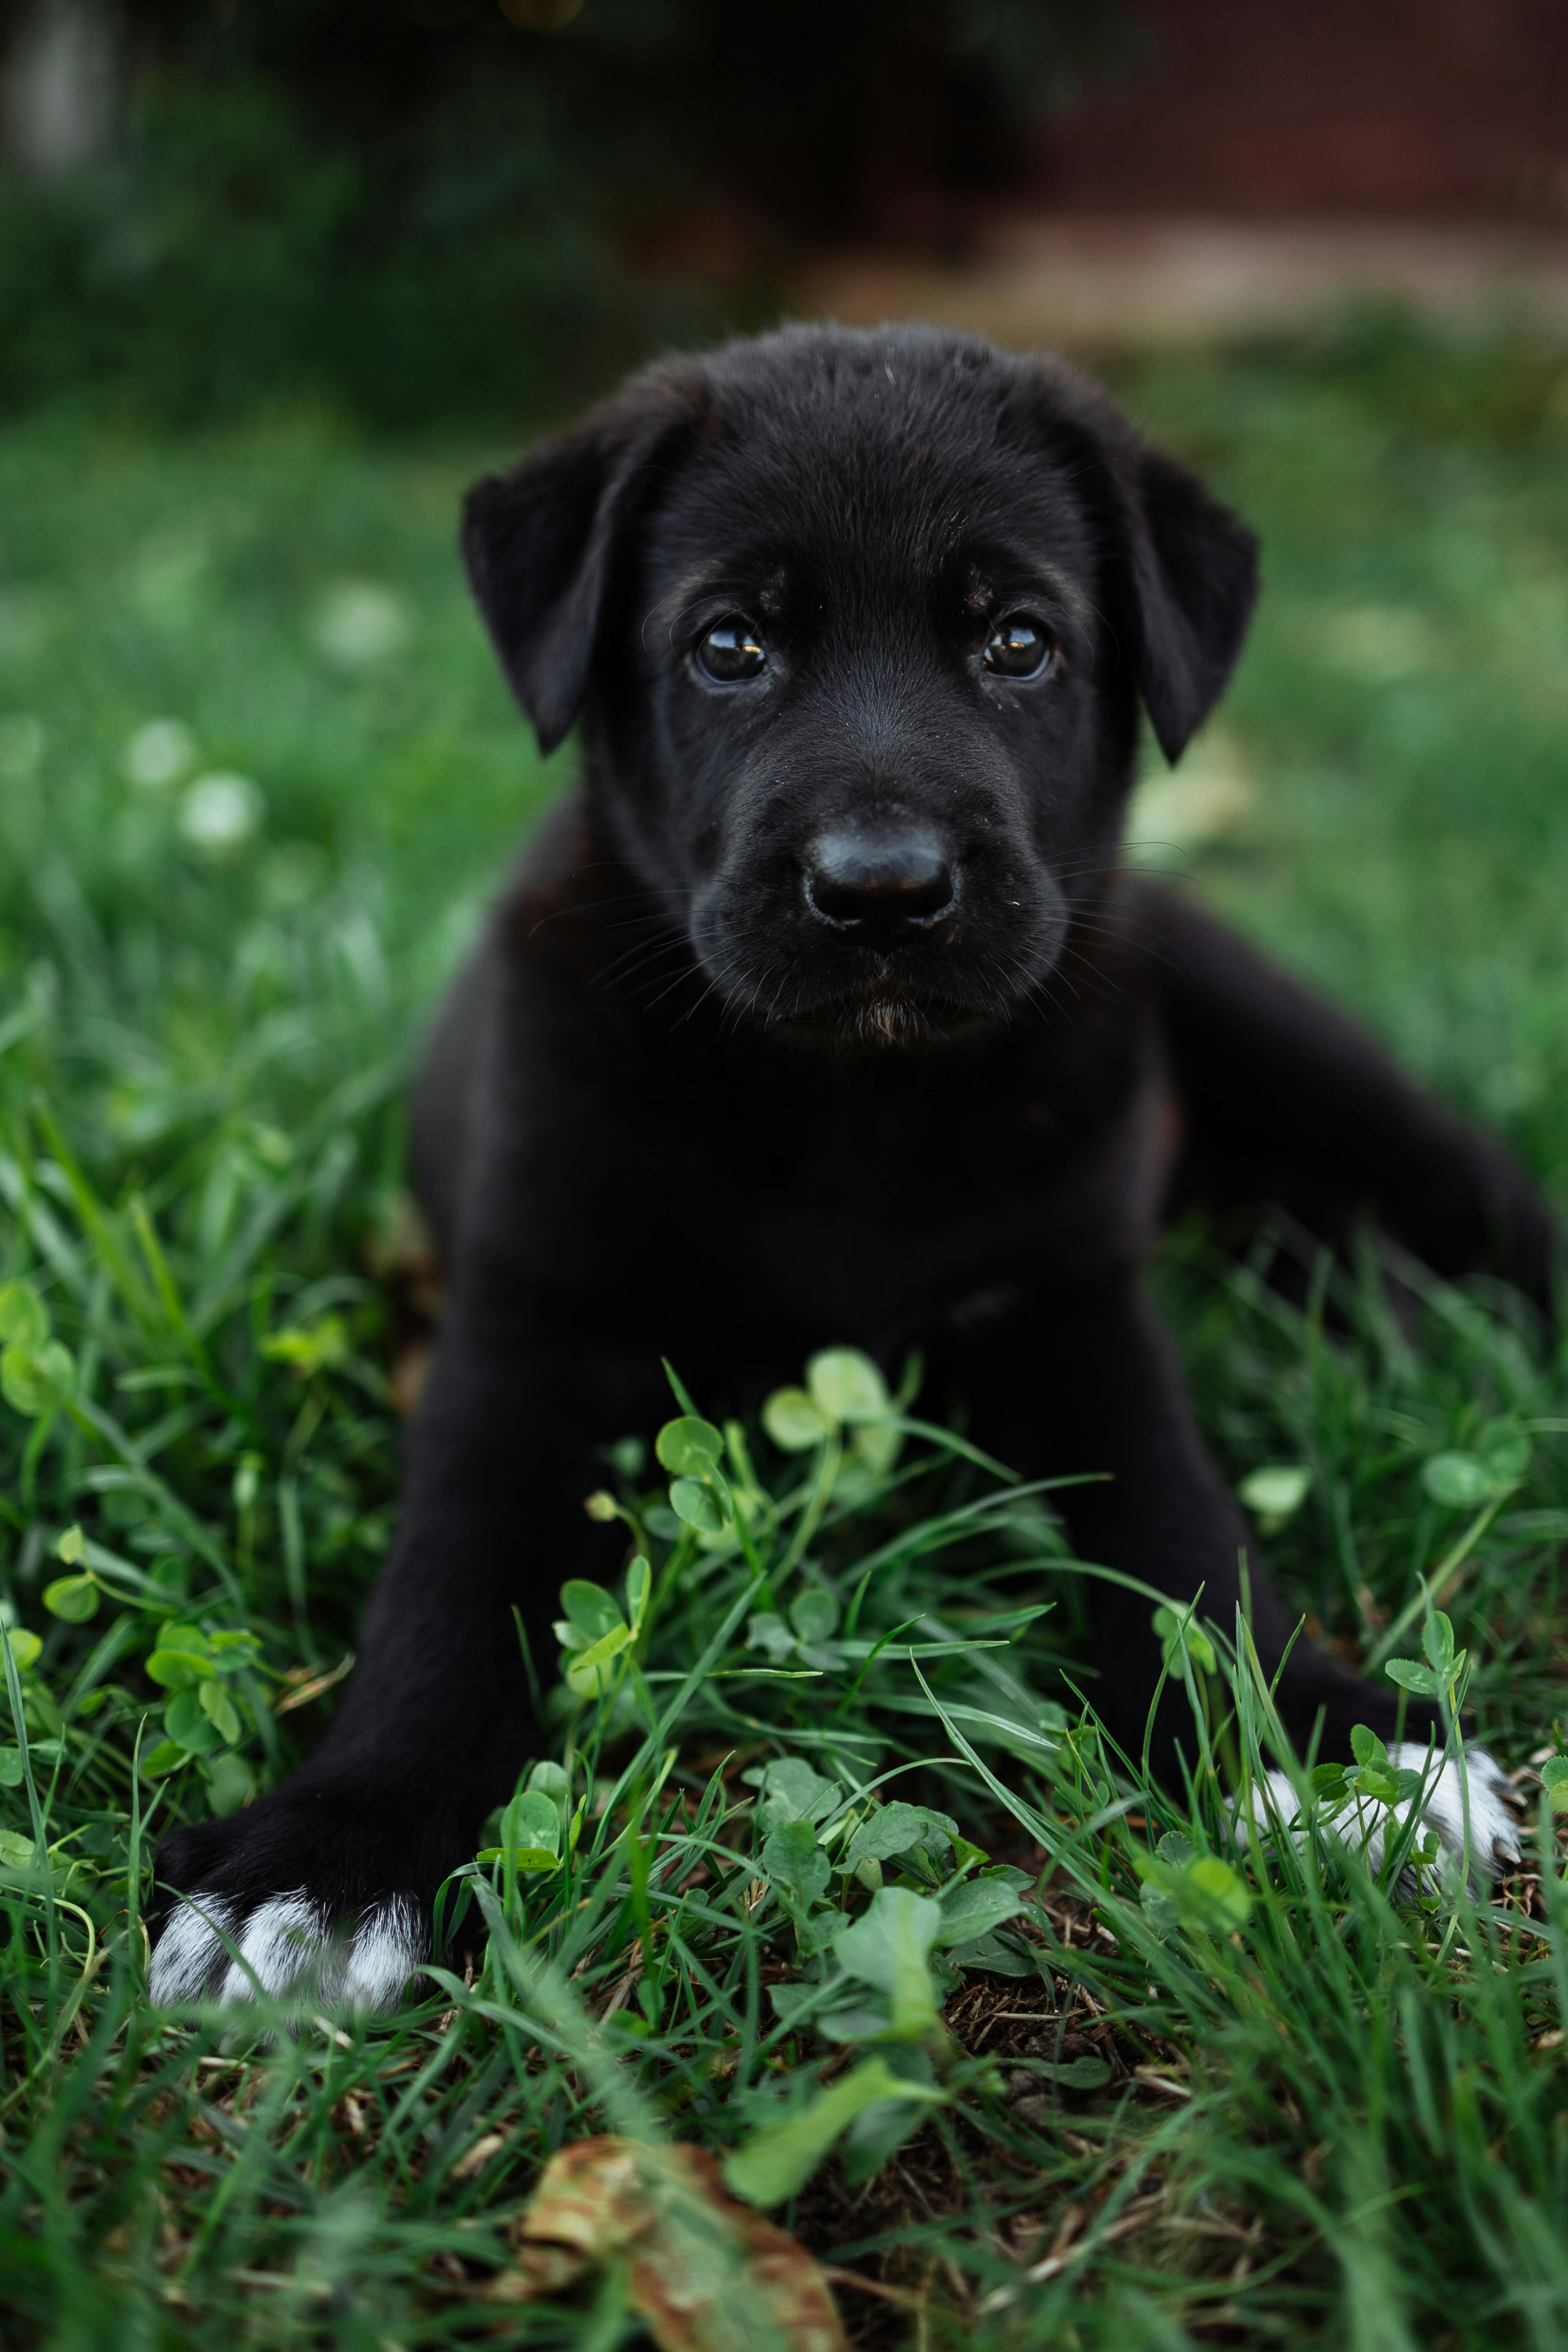 An Adorable Black Puppy · Free Stock Photo